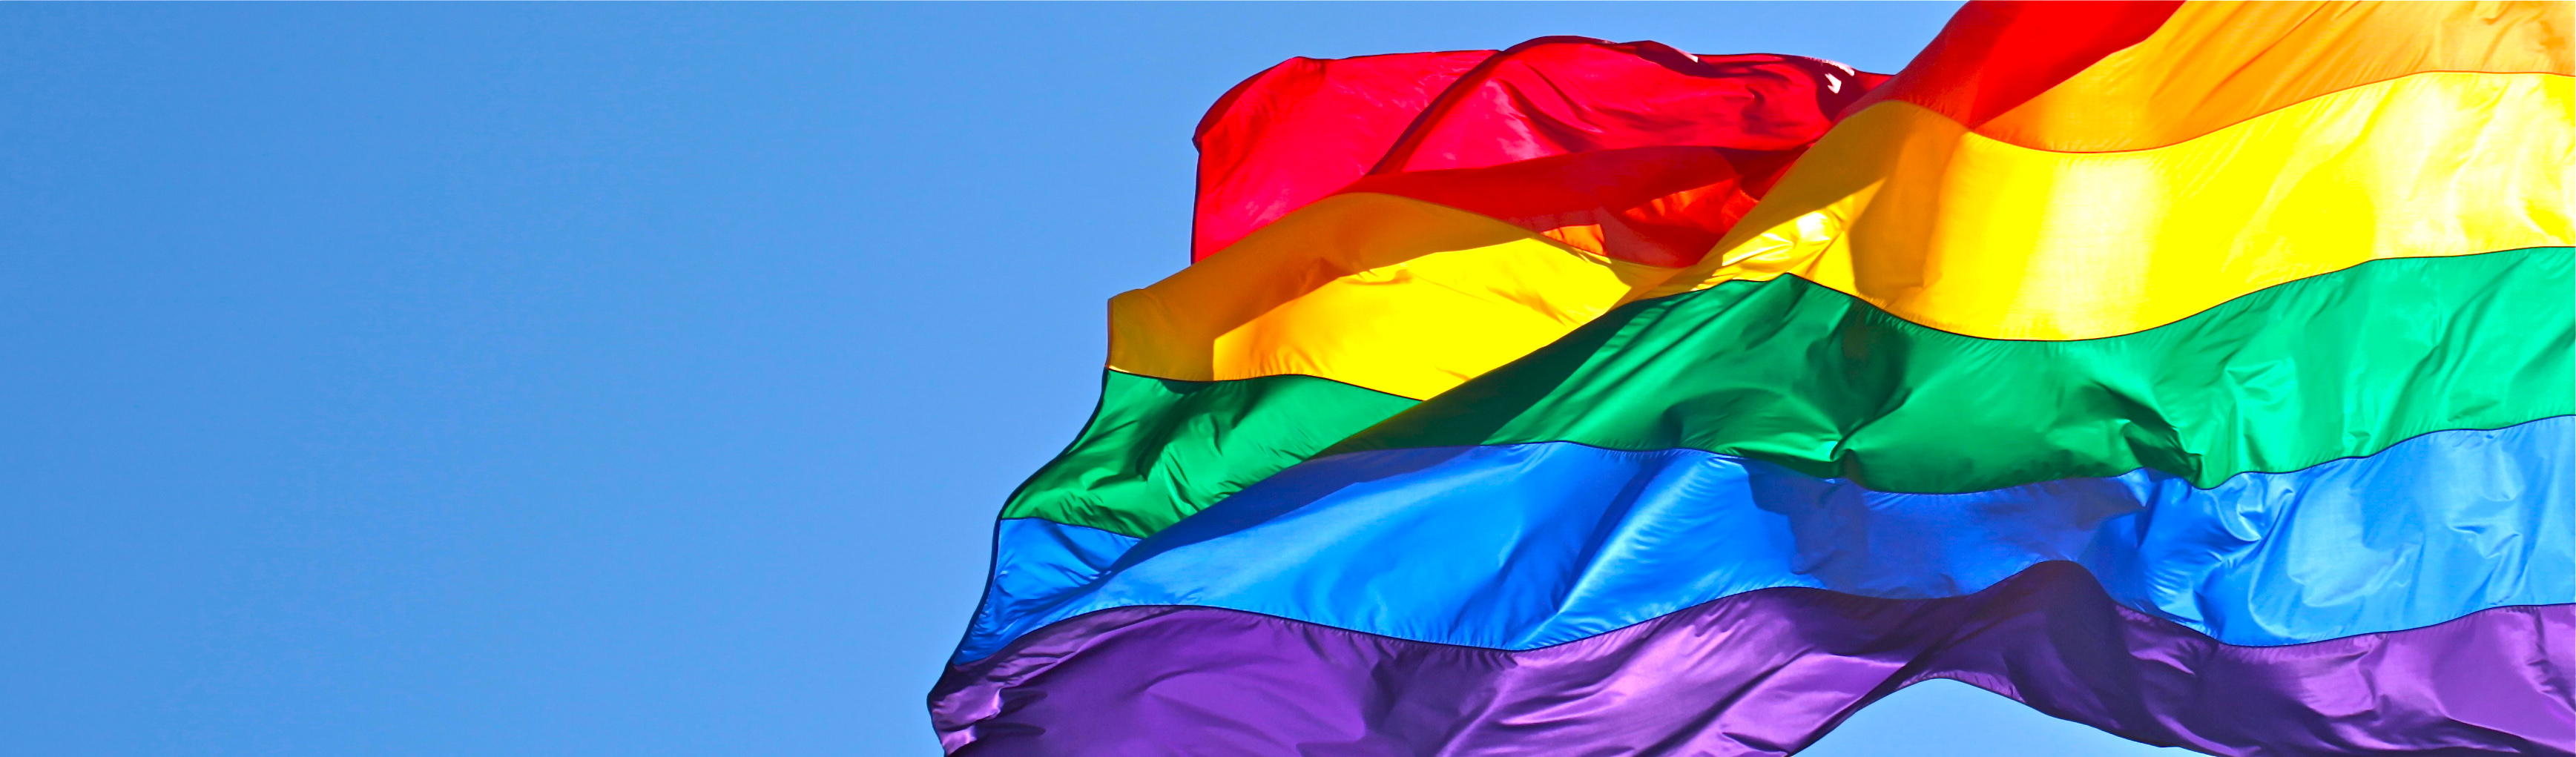 The Rainbow Flag is a symbol of LGBT pride. 